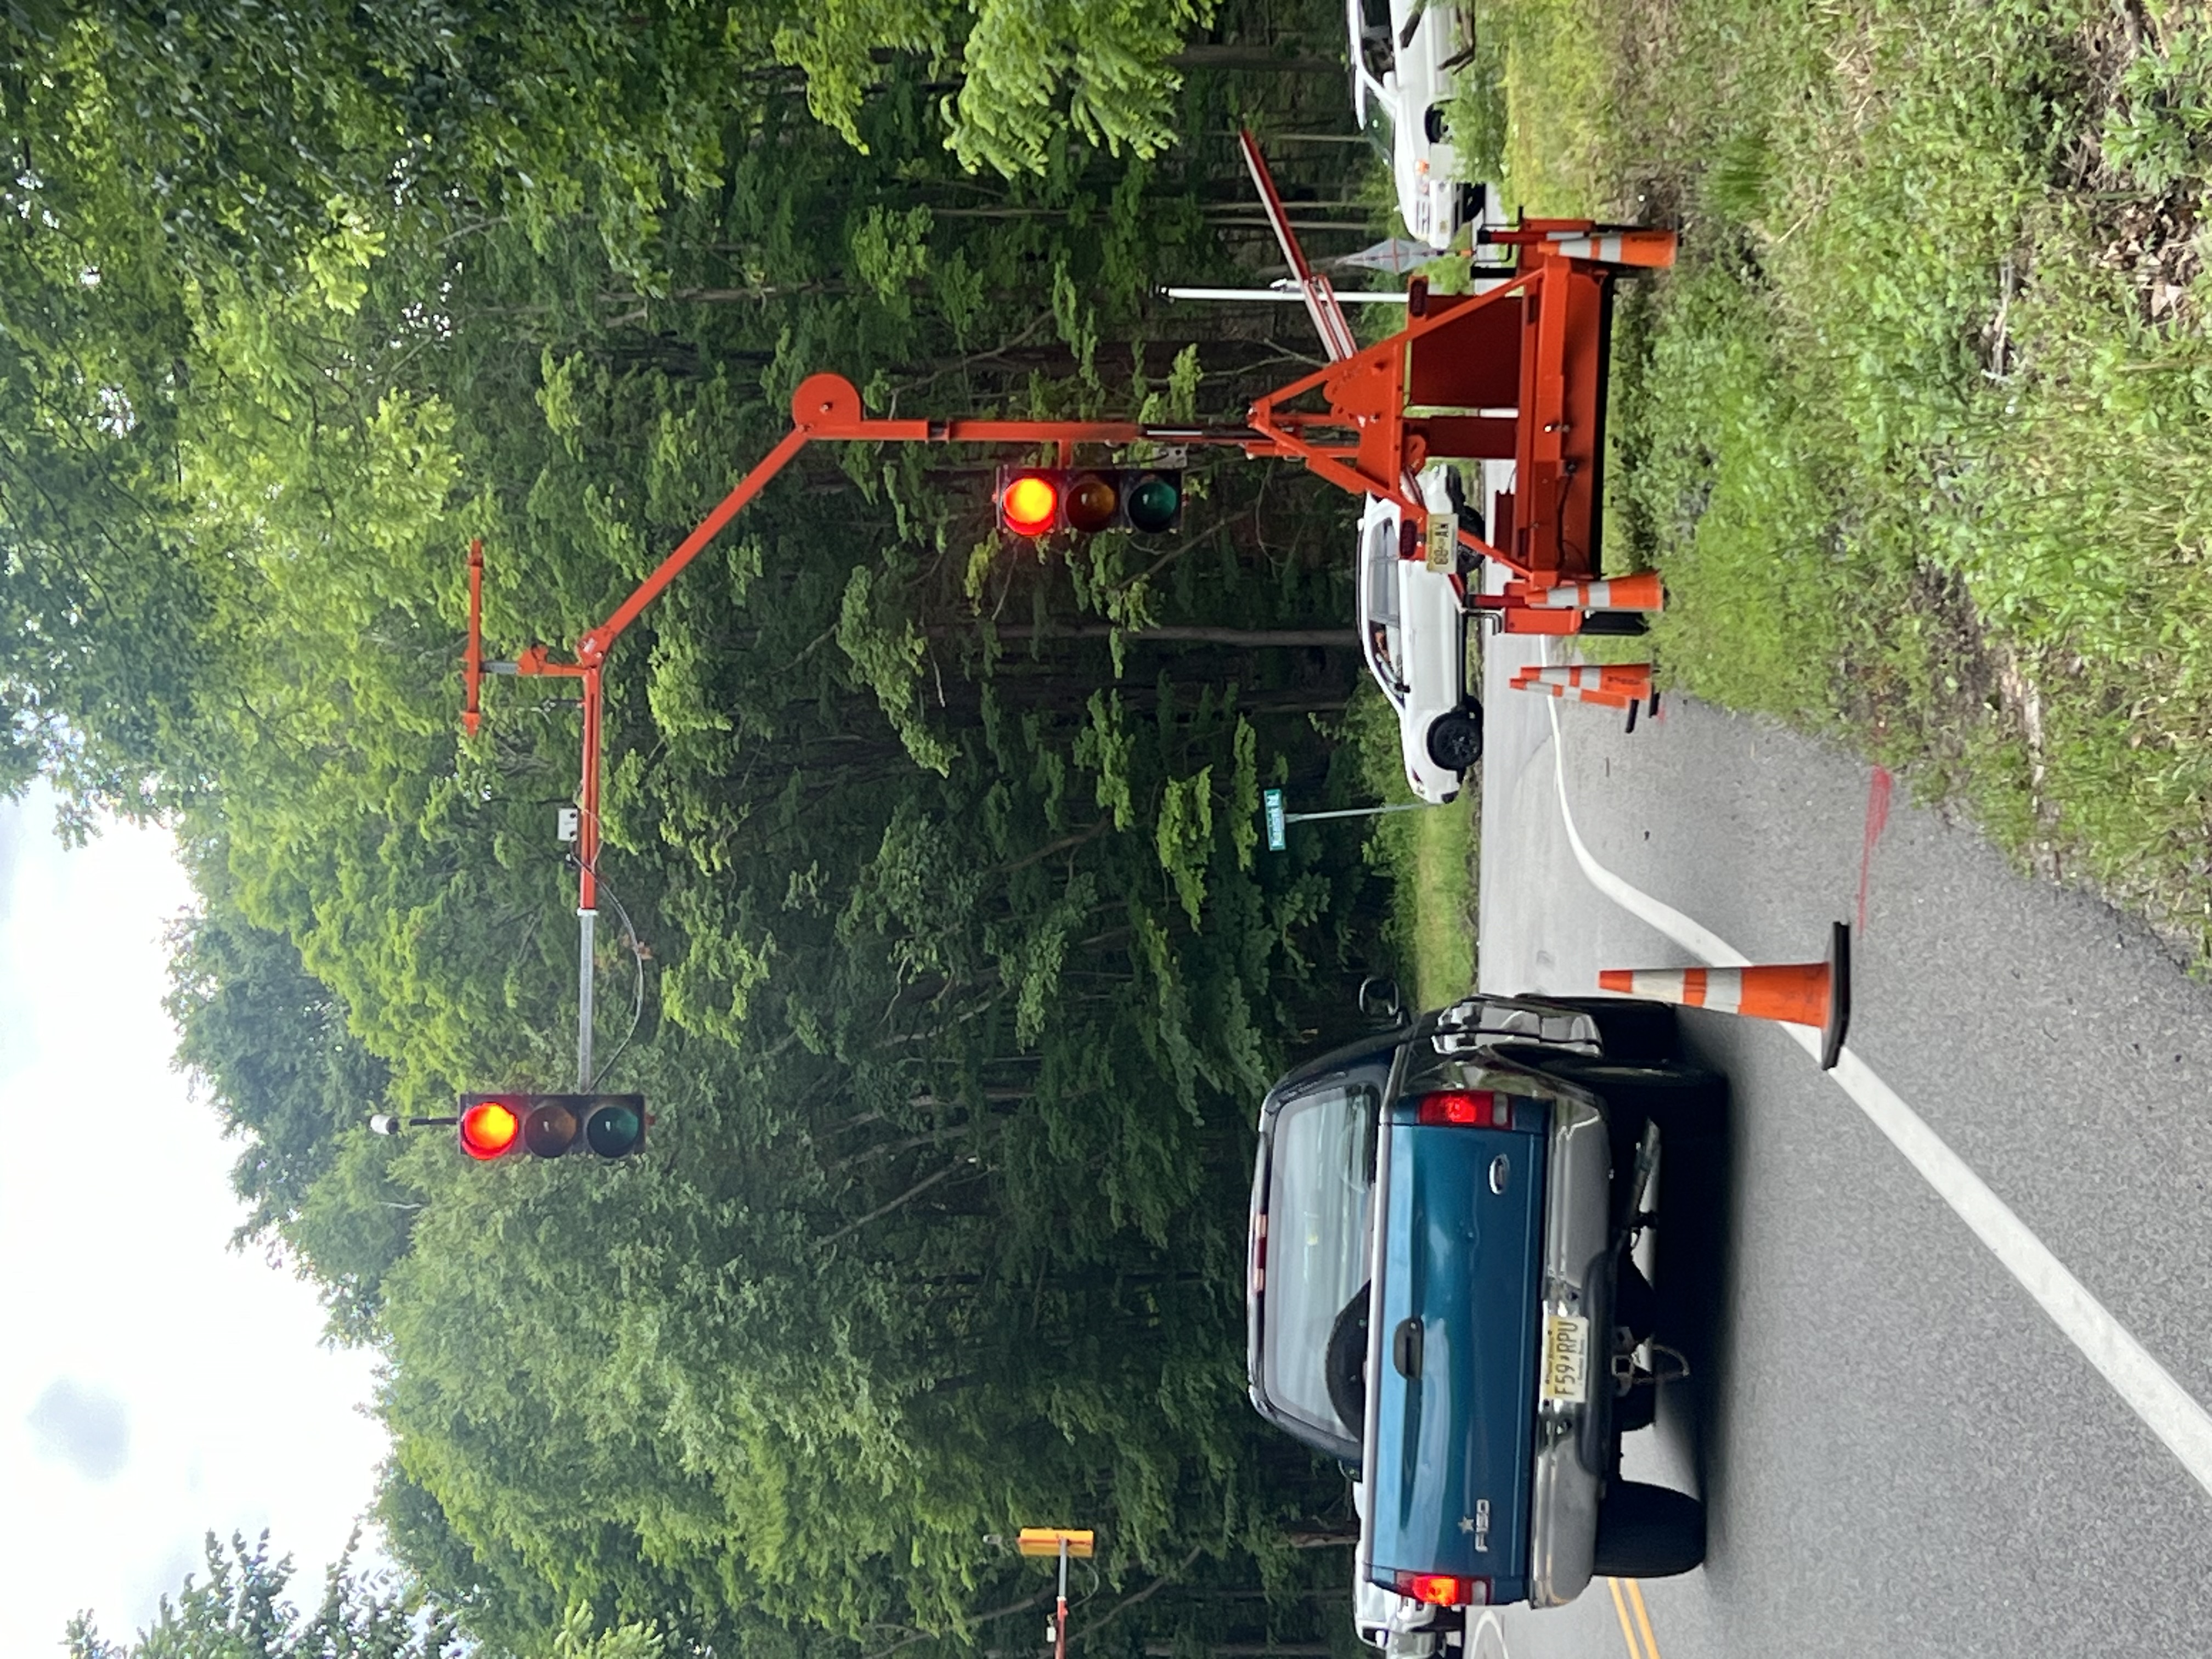 emporary traffic signal installed at the intersection of Berkshire Valley Road and Minnisink Road